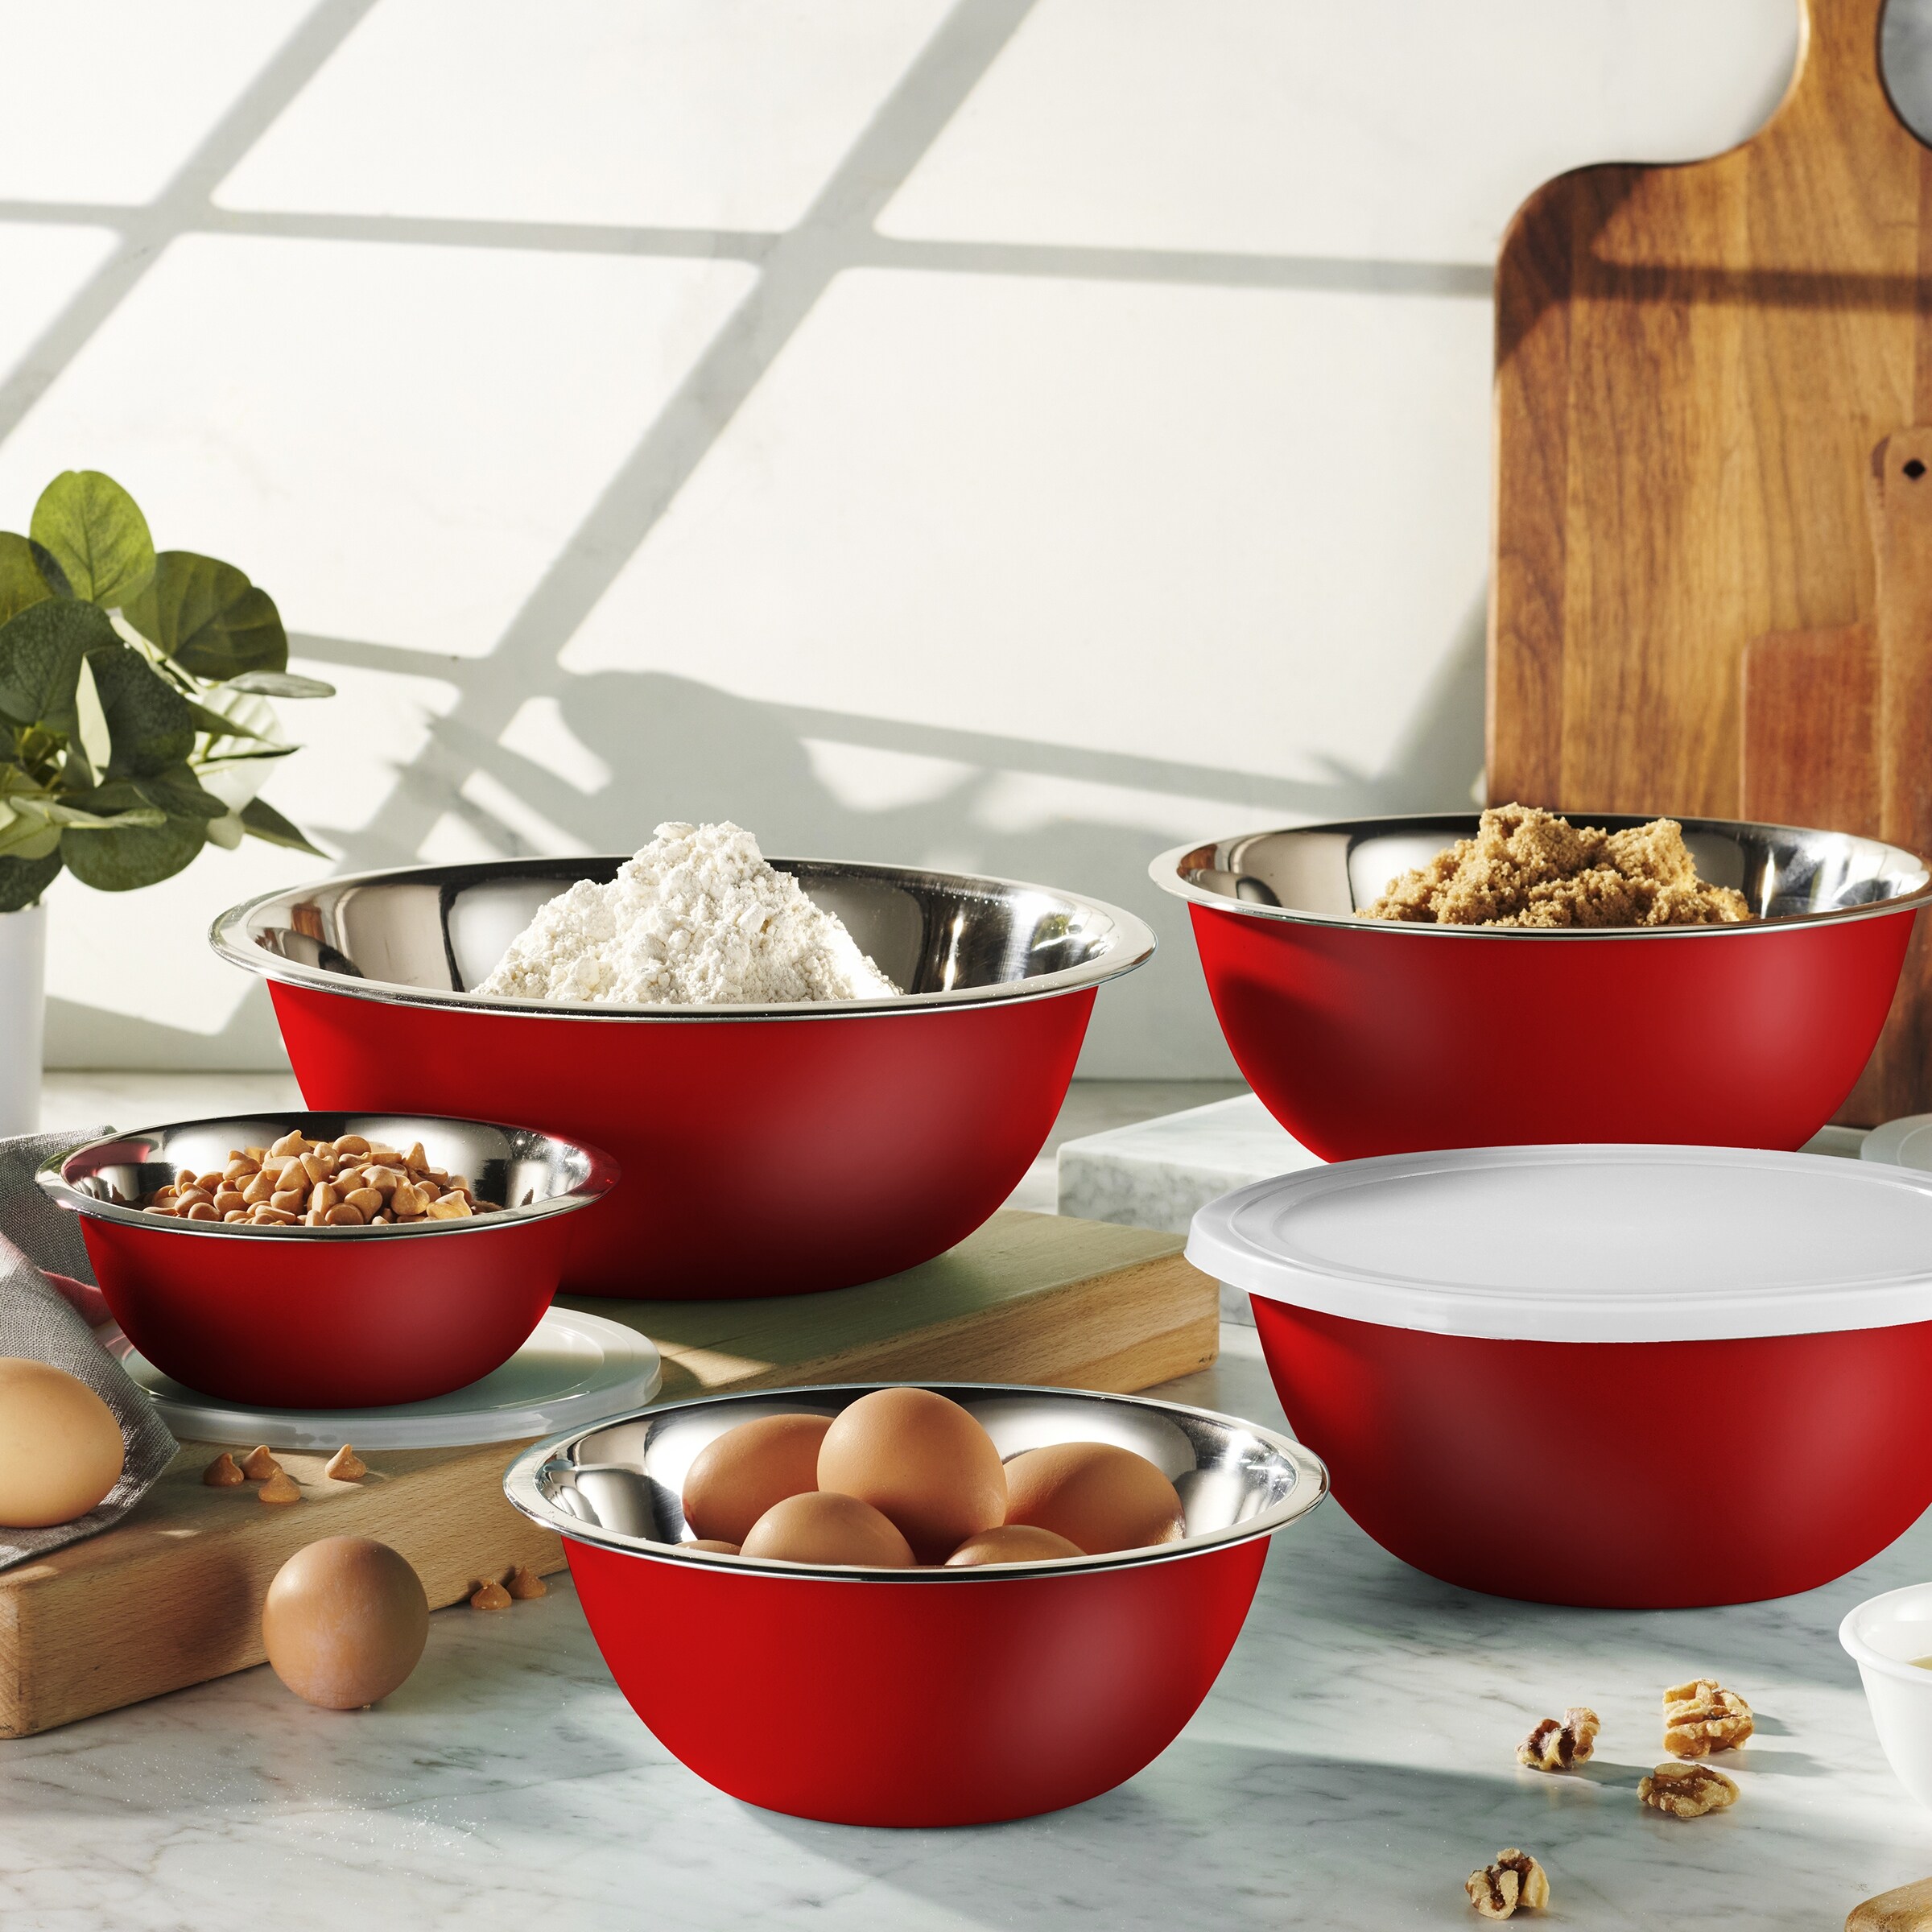 https://ak1.ostkcdn.com/images/products/is/images/direct/78d03af04d1d0527bcc2869a6873aa4557a68205/Heavy-Duty-Meal-Prep-Stainless-Steel-Mixing-Bowls-Set-with-Lids.jpg